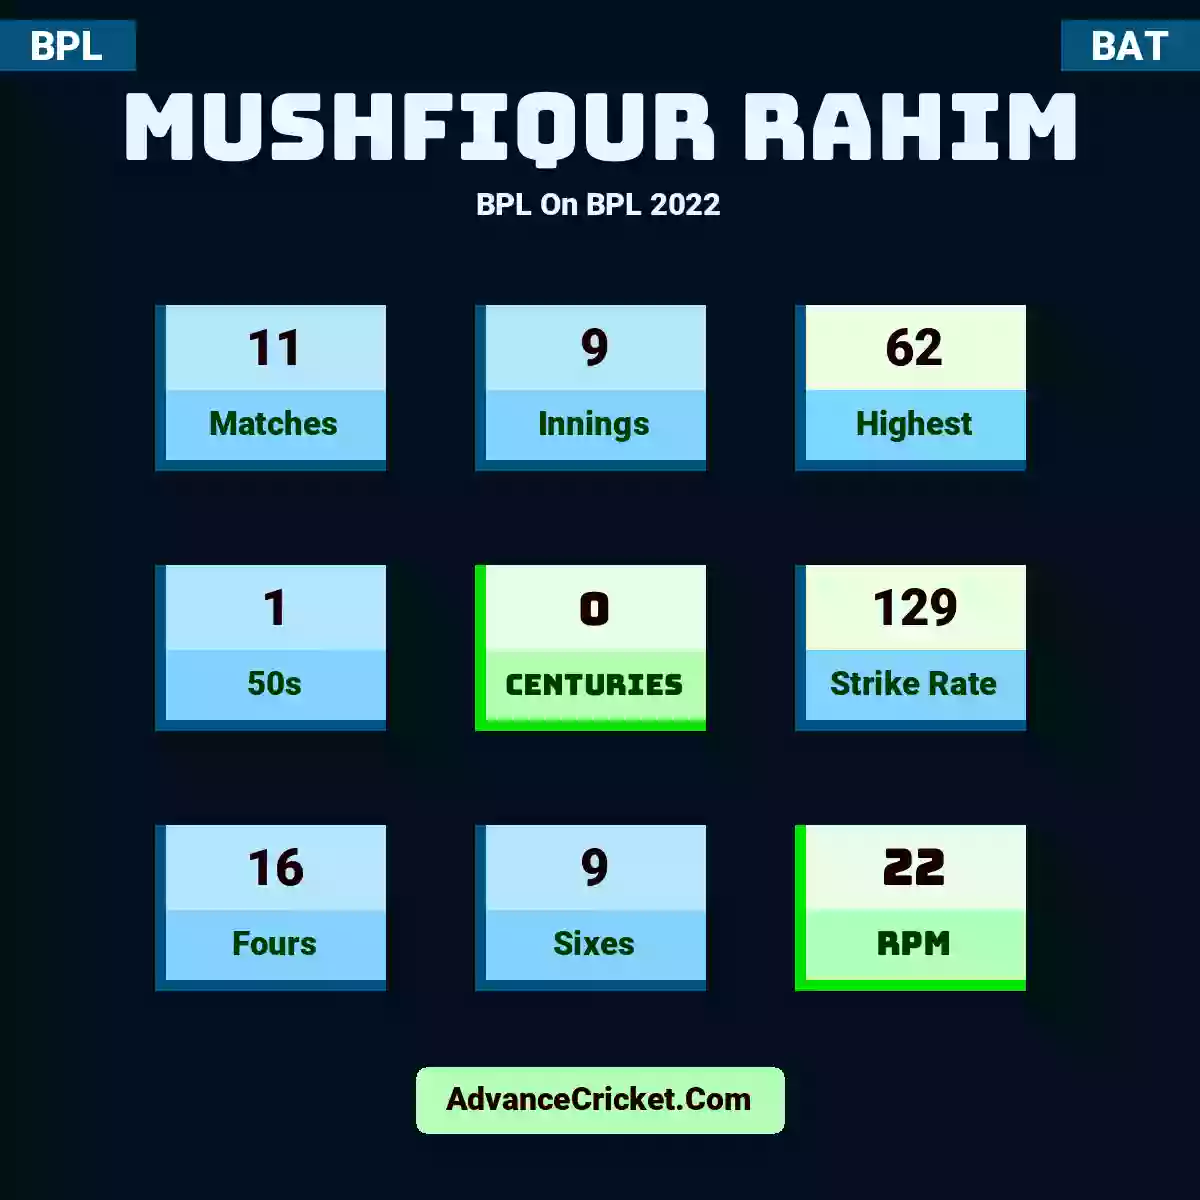 Mushfiqur Rahim BPL  On BPL 2022, Mushfiqur Rahim played 11 matches, scored 62 runs as highest, 1 half-centuries, and 0 centuries, with a strike rate of 129. M.Rahim hit 16 fours and 9 sixes, with an RPM of 22.